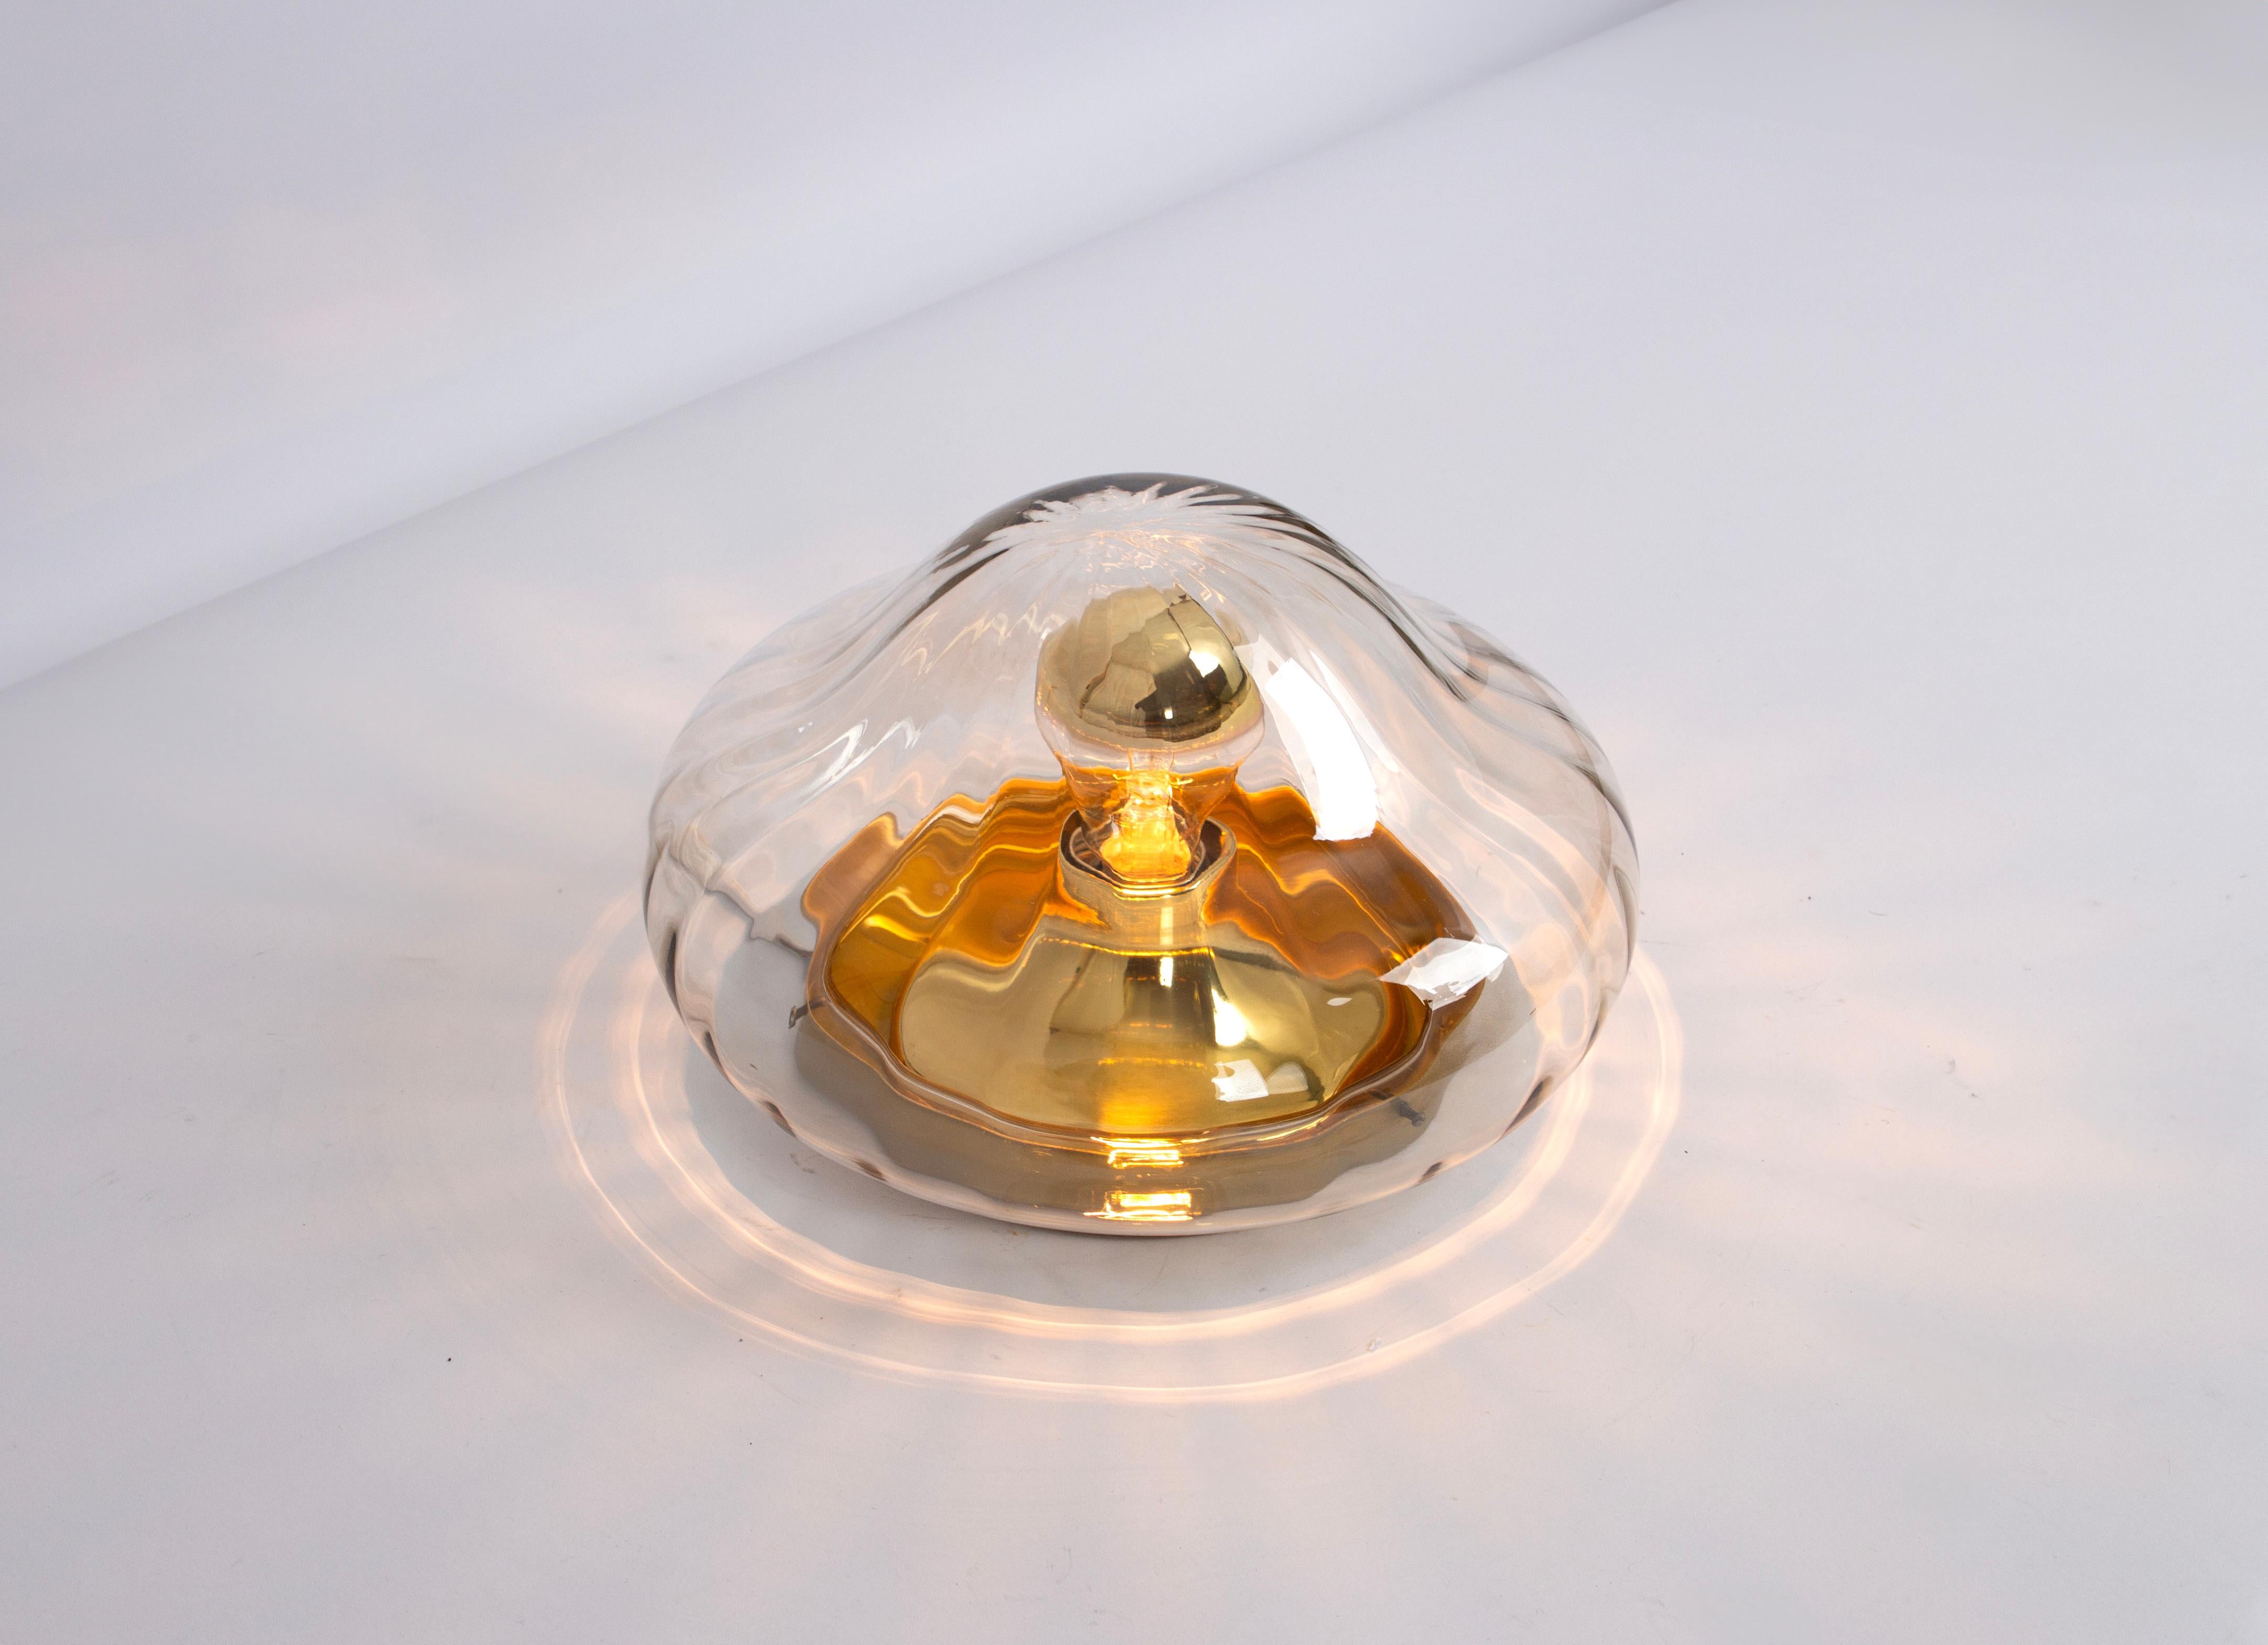 Vintage Sputnik lamp from the 1970s manufactured in Germany, 1970s.
This lamp can be used as a ceiling lamp, or as a wall lamp.
Wonderful glass shape and light effect.
Sockets: 1 x E27 standard Bulb.
Light bulbs are not included. It is possible to